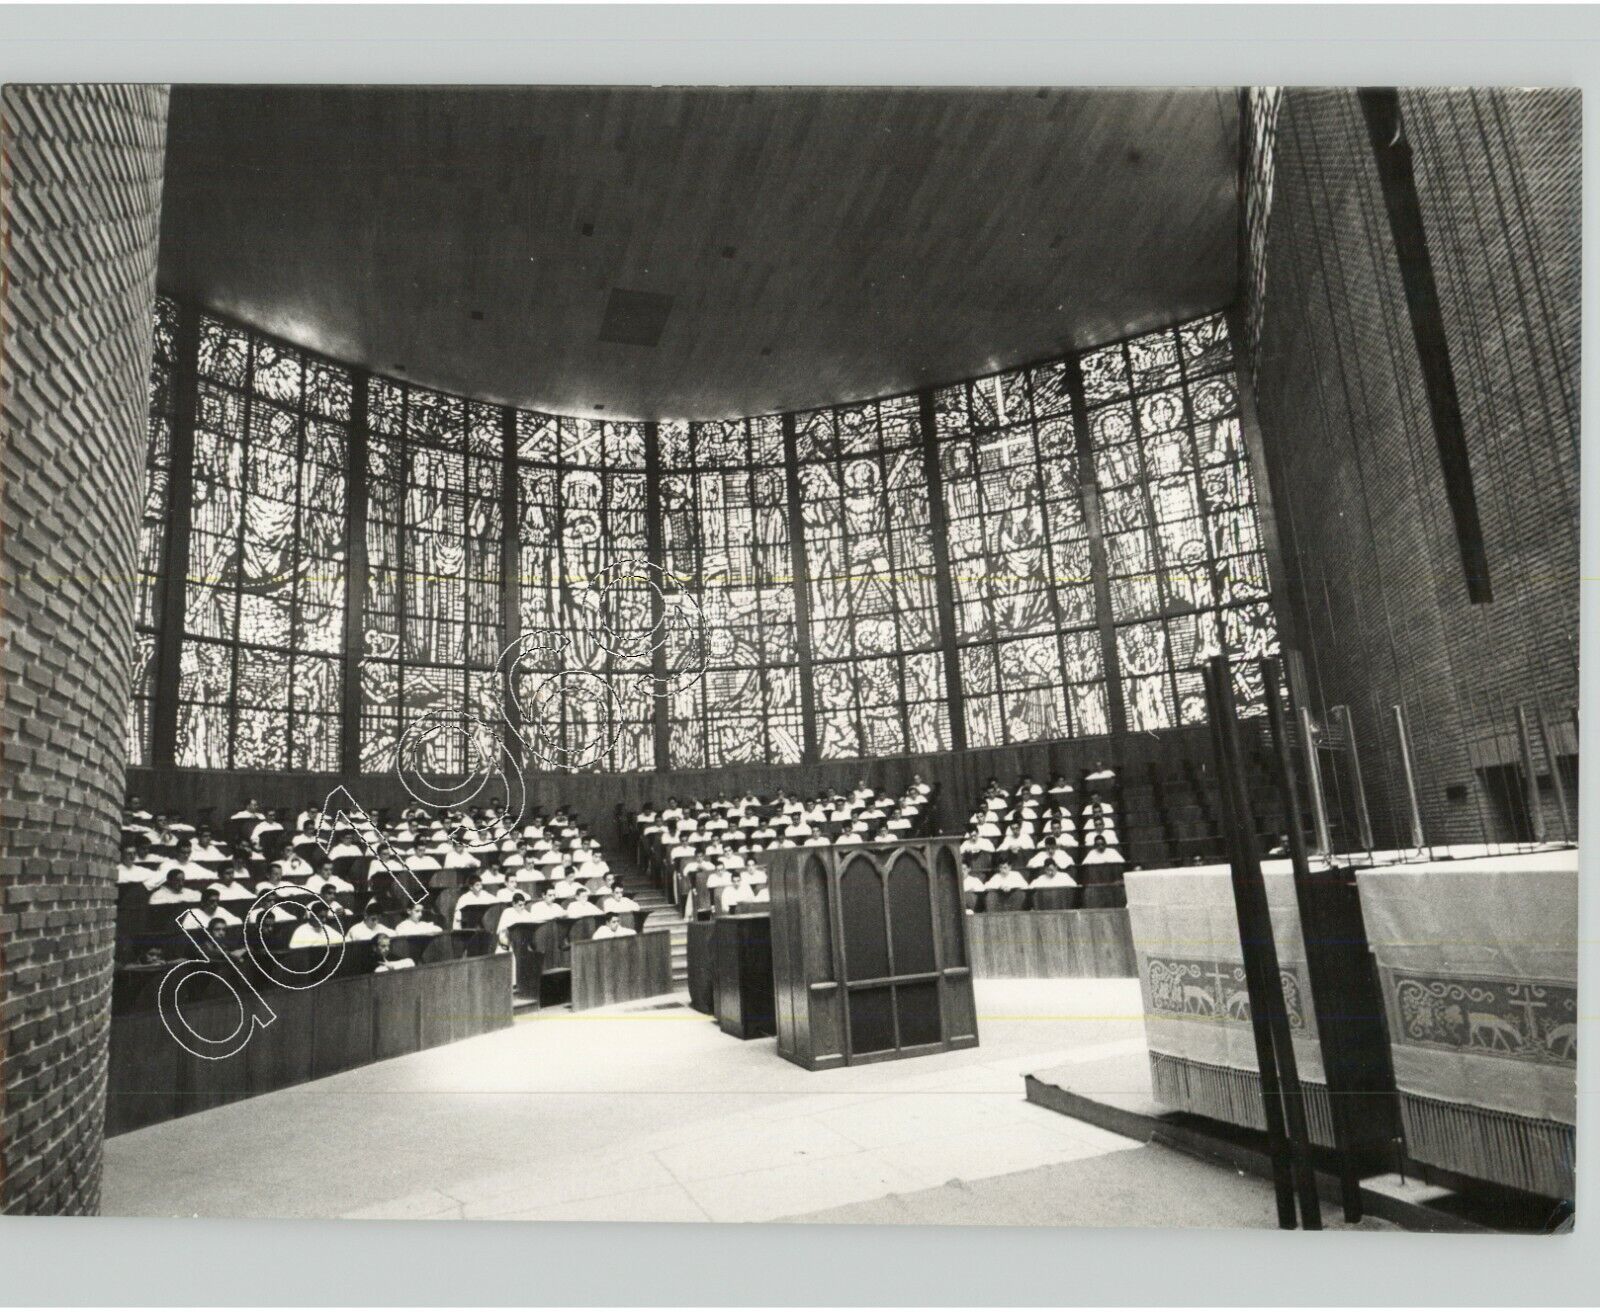 MODERNIST CHURCH in MADRID, SPAIN 1959 Miguel Fisac ARCHITECTURE VTG Press Photo